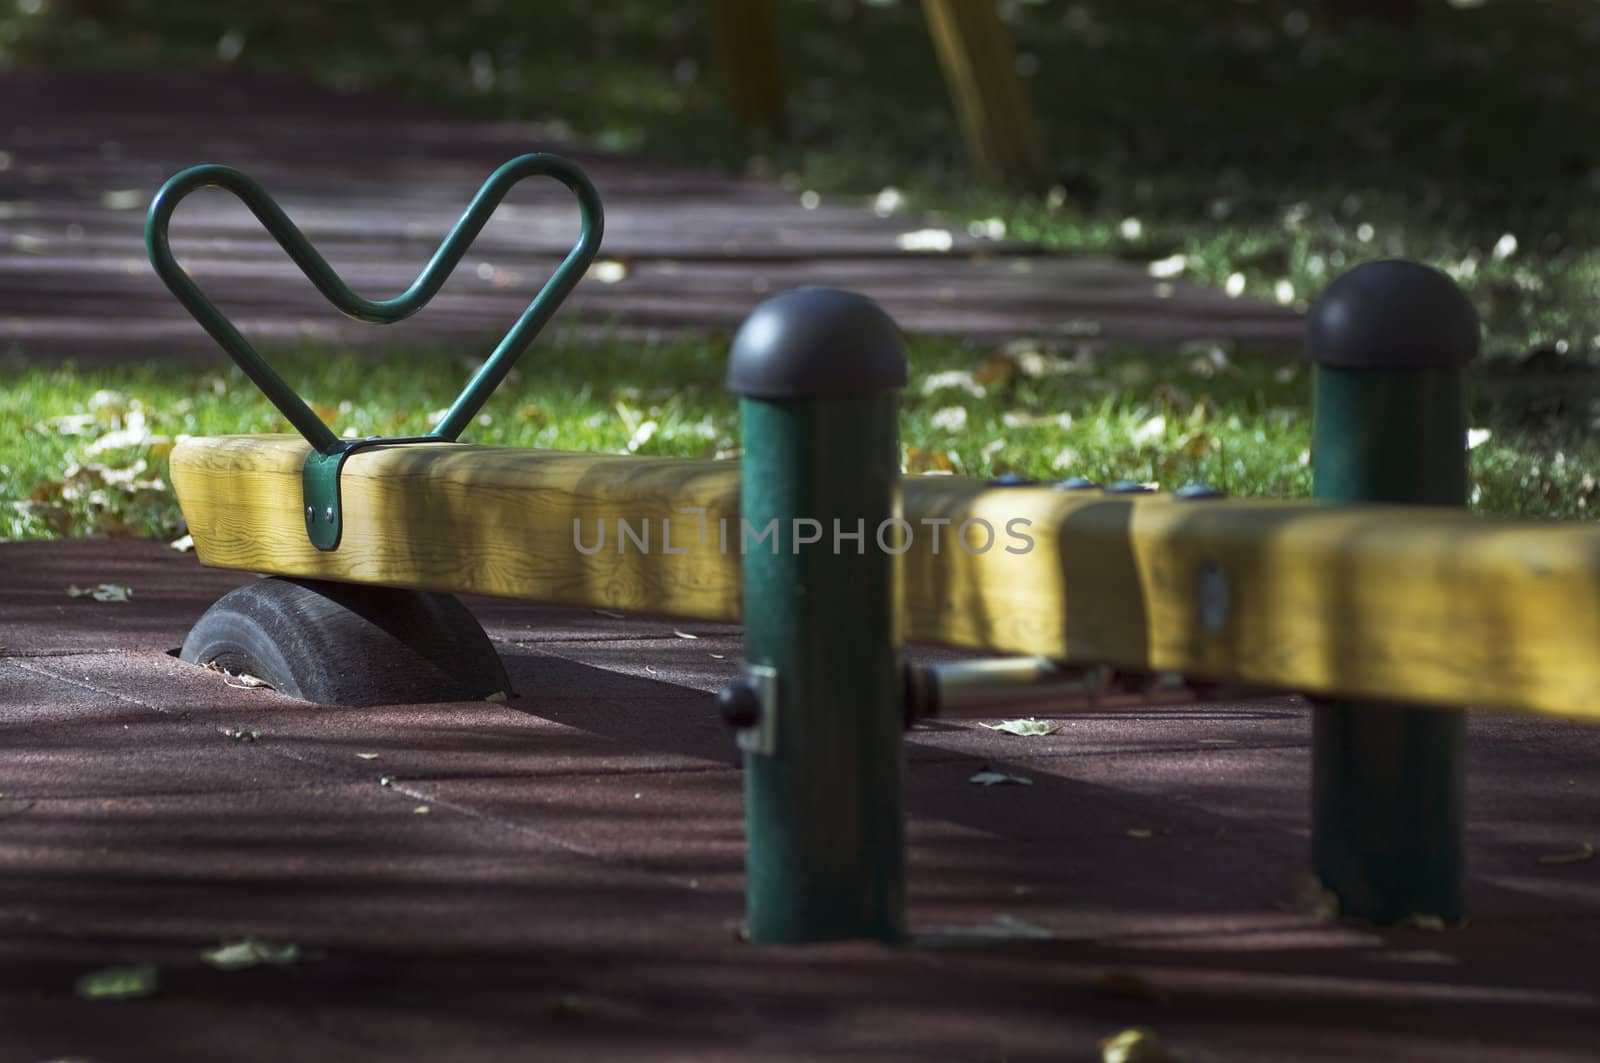 Detail of a seesaw in a park by mrfotos